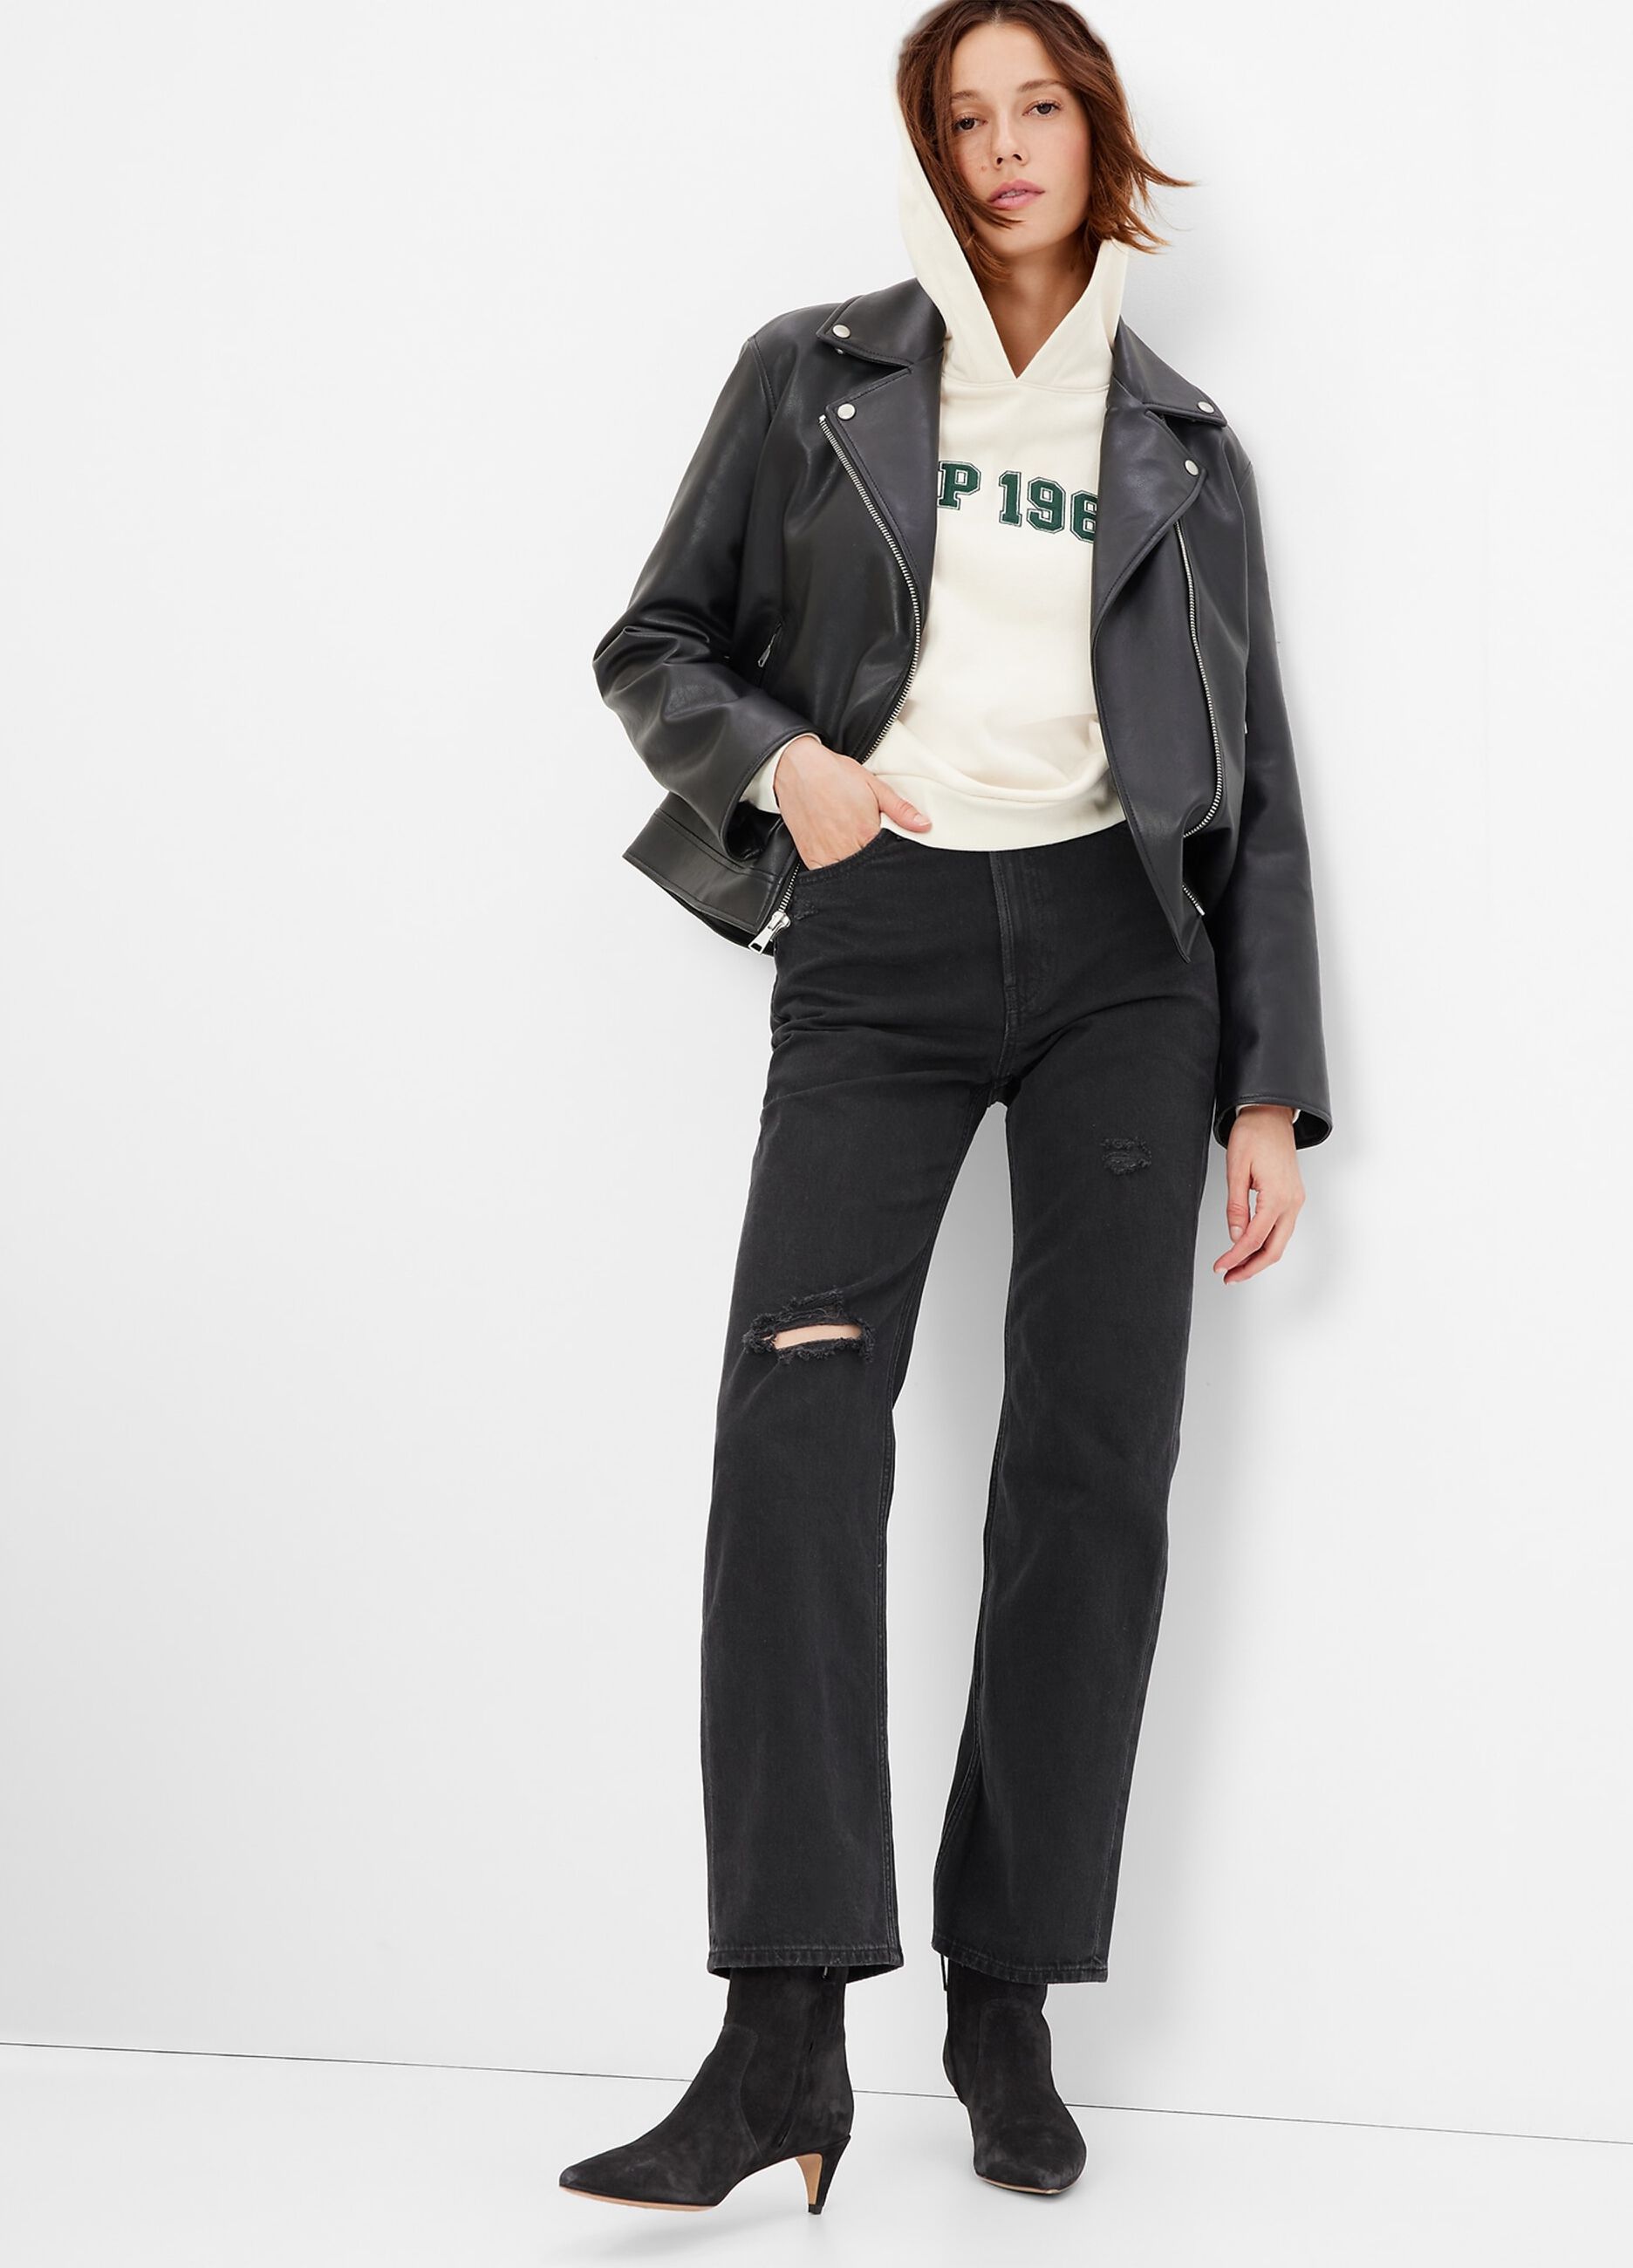 Loose-fit, high-rise jeans with rips